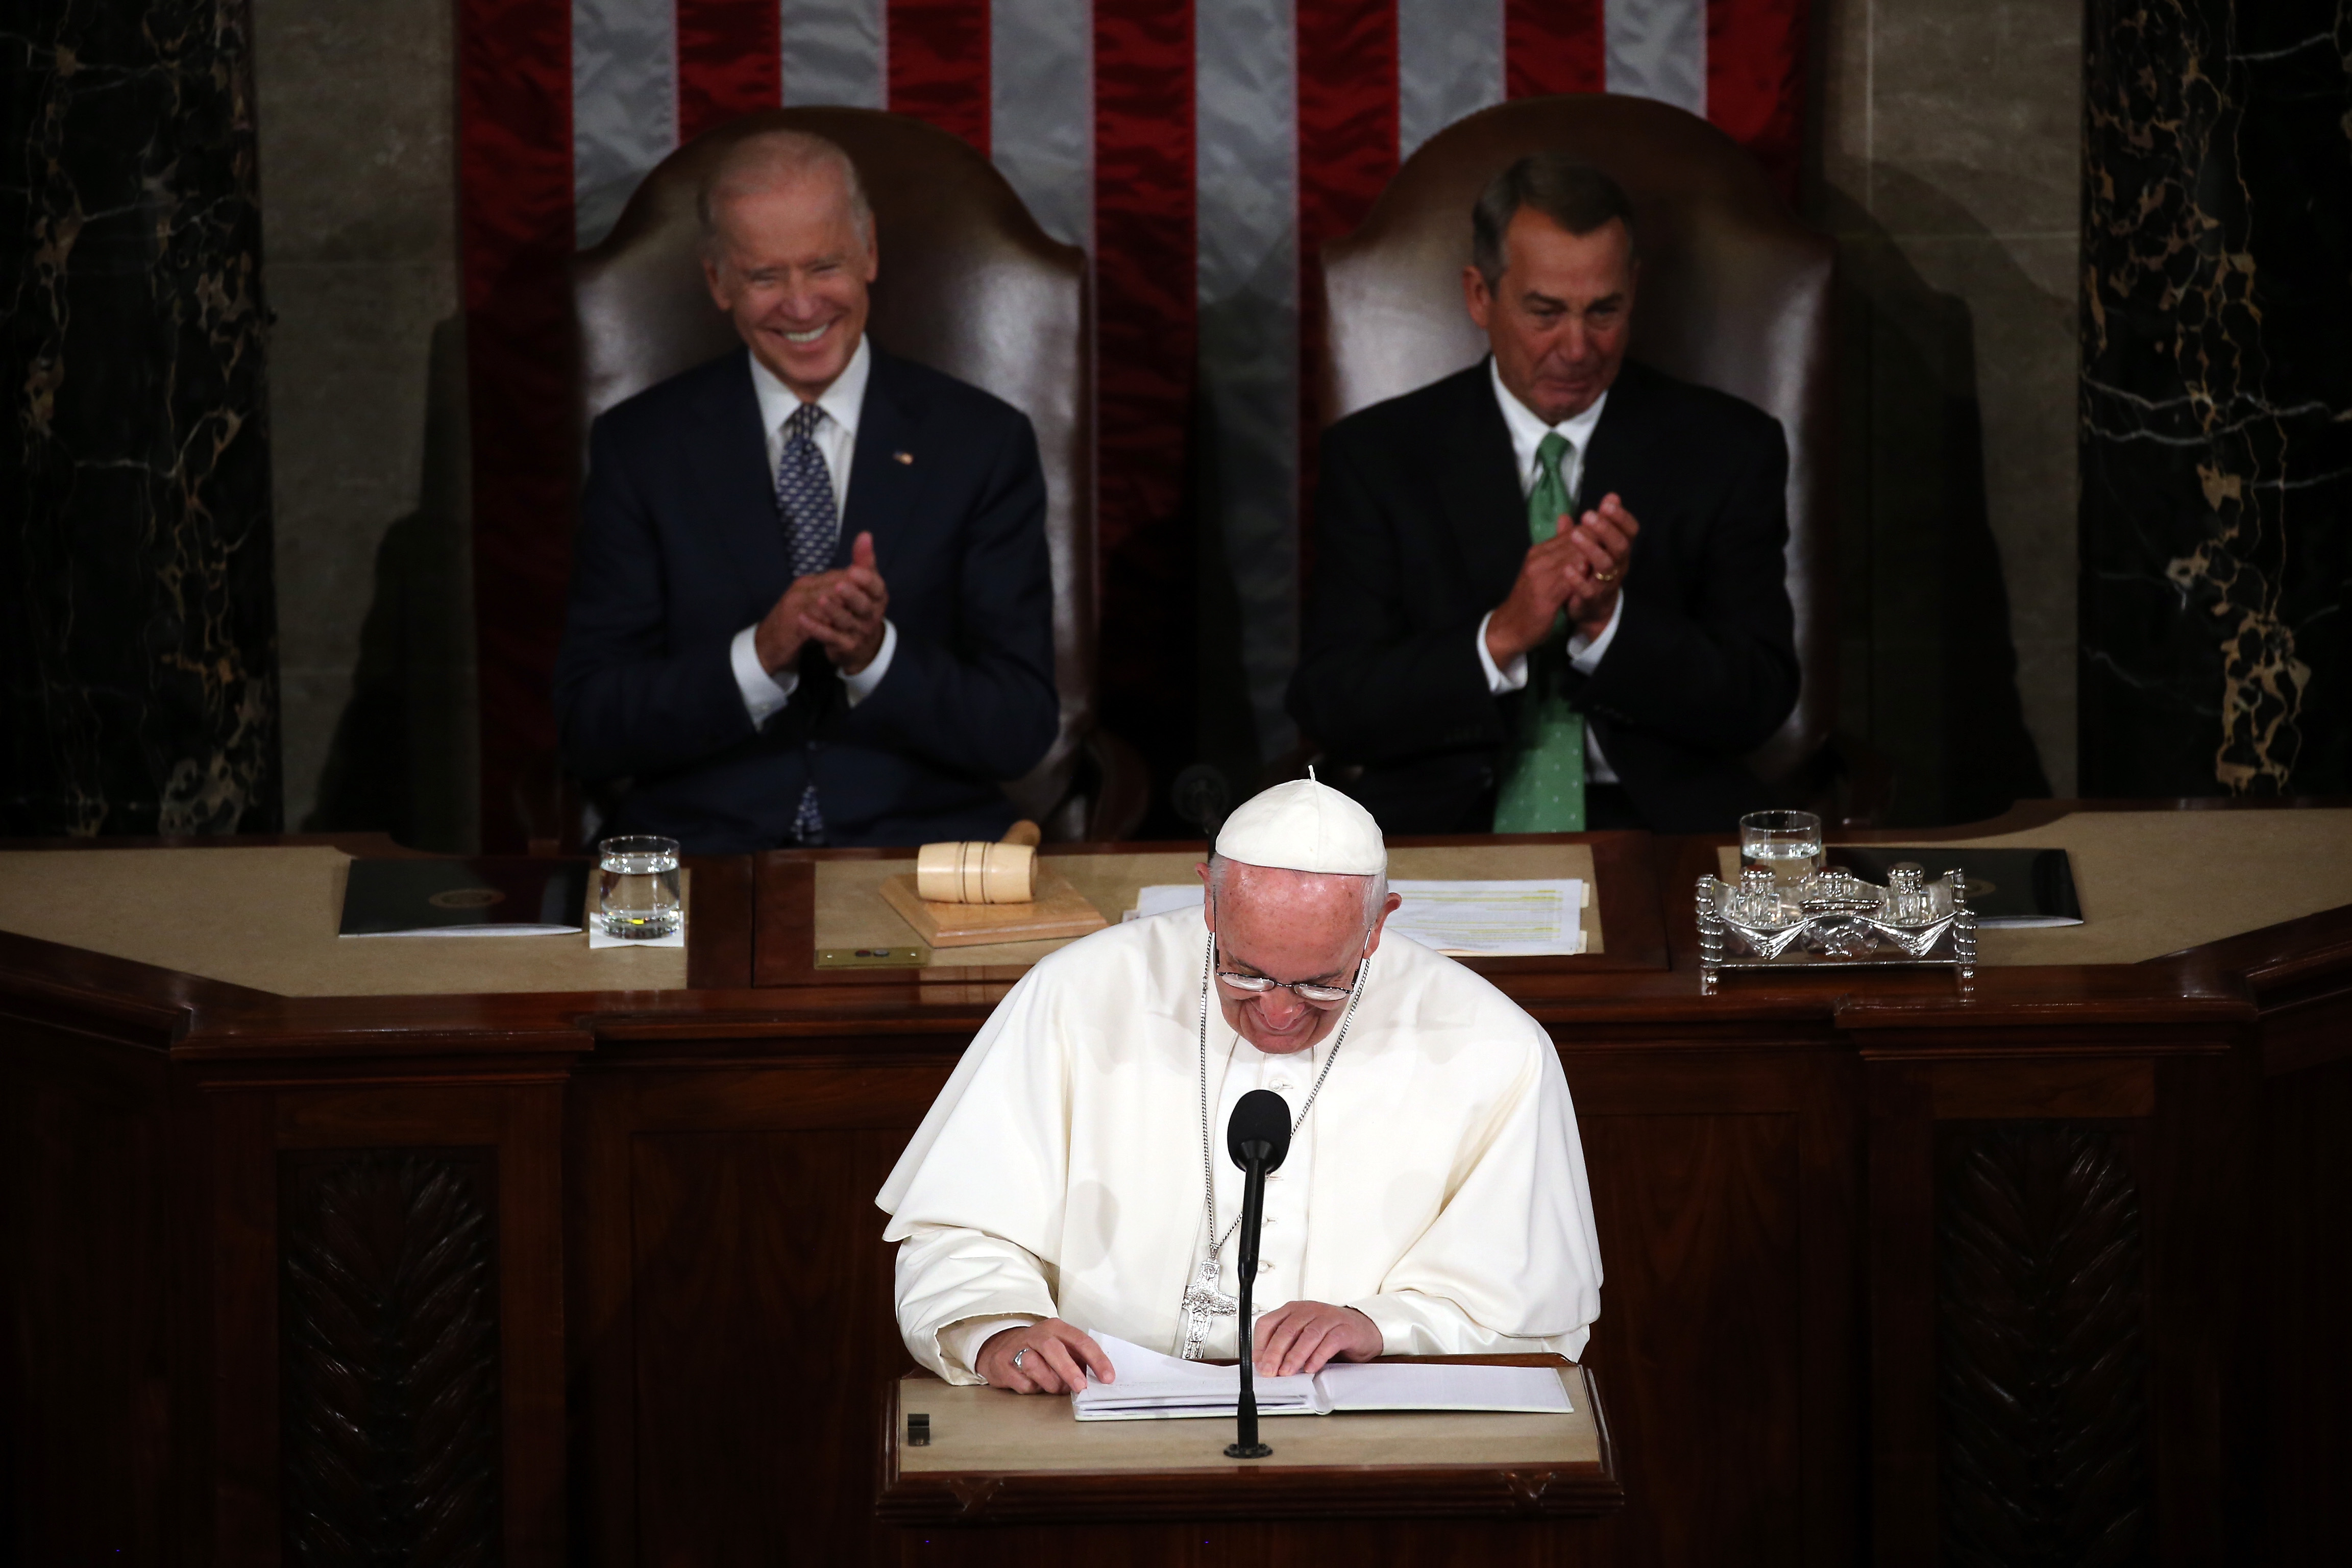 Pope Francis addresses a joint meeting of the U.S. Congress with with Vice President Joe Biden (L) and Speaker of the House John Boehner (R-OH) in the House Chamber of the U.S. Capitol in Washington, D.C., on Sept. 24, 2015. (Mark Wilson—Getty Images)